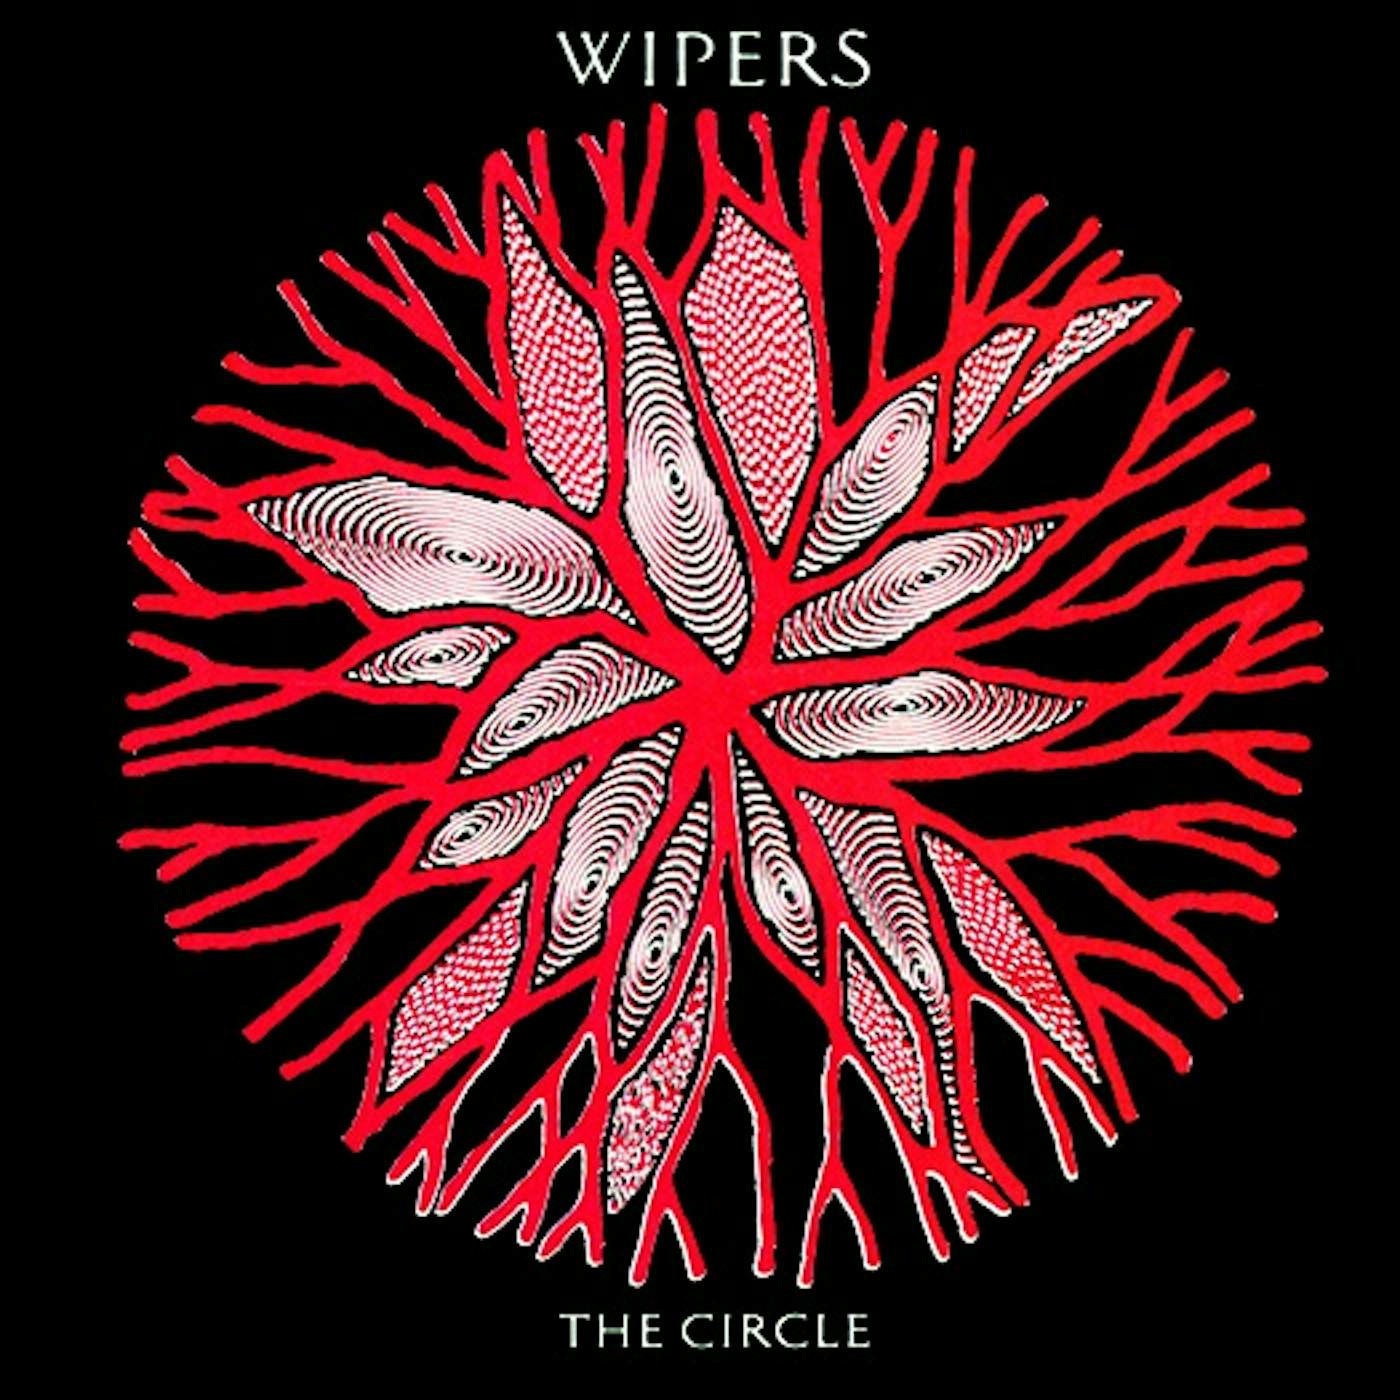 Wipers THE CIRCLE (2016 REISSUE) CD